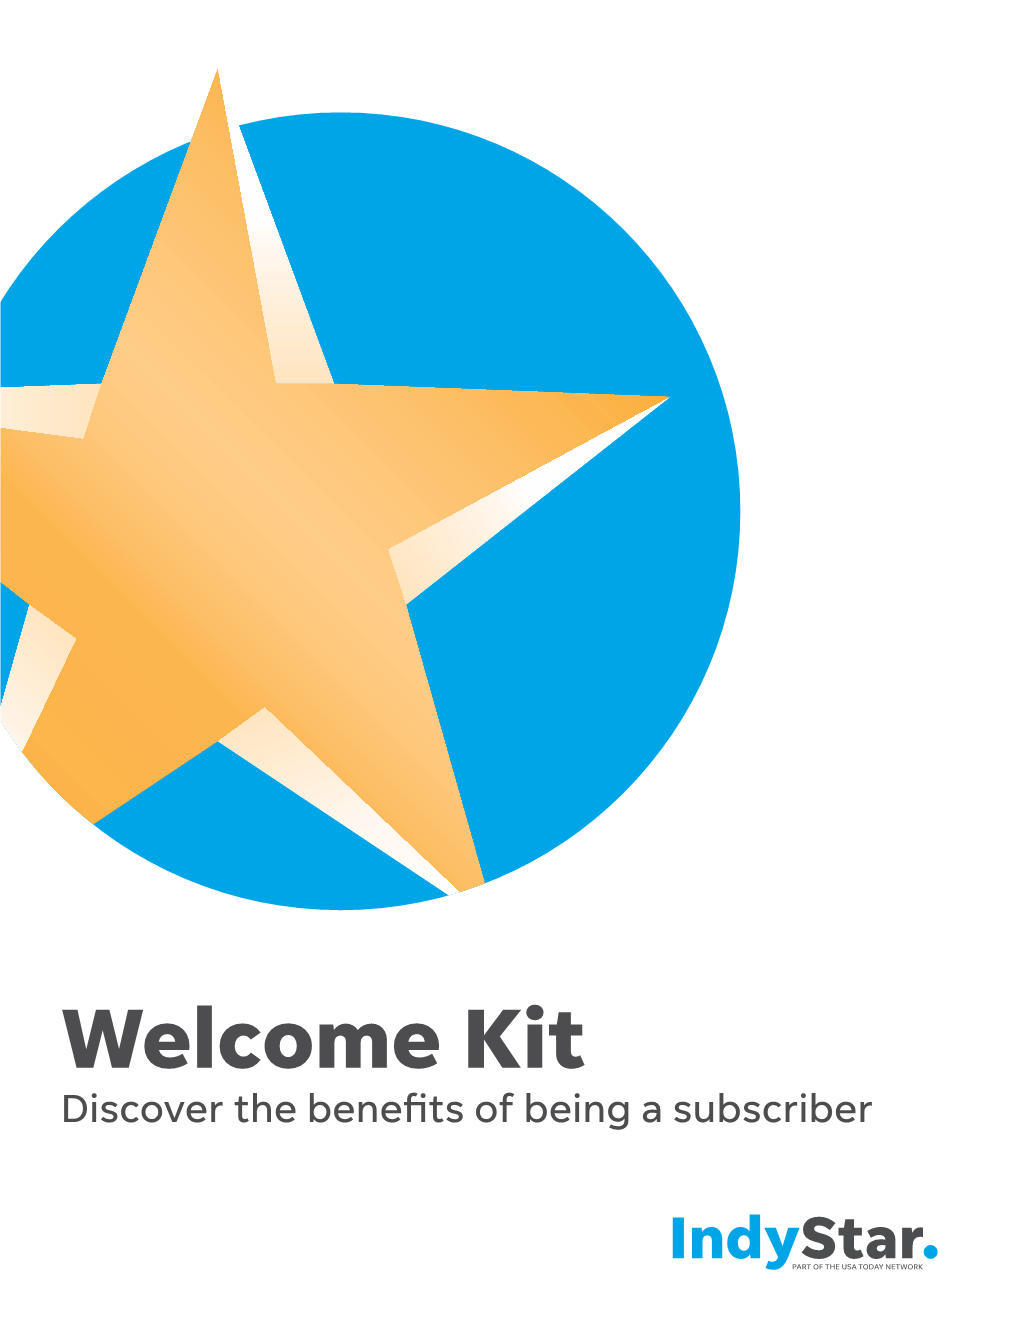 Welcome Kit Discover the Benefits of Being a Subscriber Indystar Dear Subscriber, We Know You Have Many Choices These Days for News 130 S